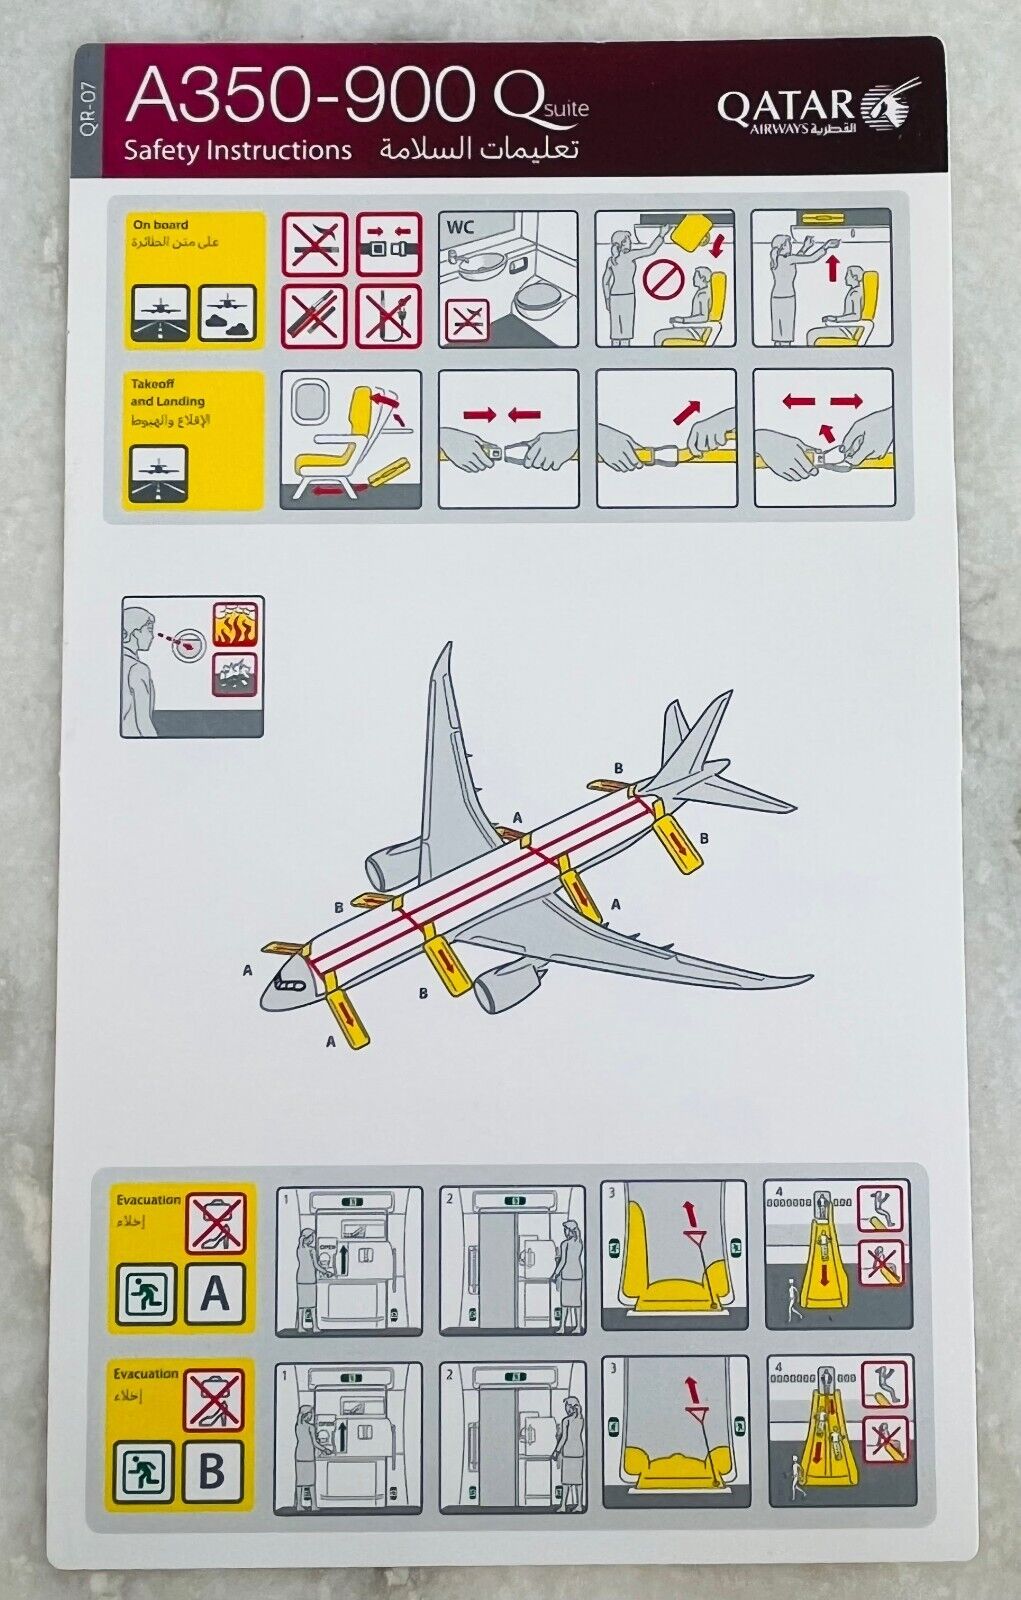 QATAR AIRWAYS Airbus A350-900 Q-Suite Safety Card Instructions Sep 2022 Ver 2